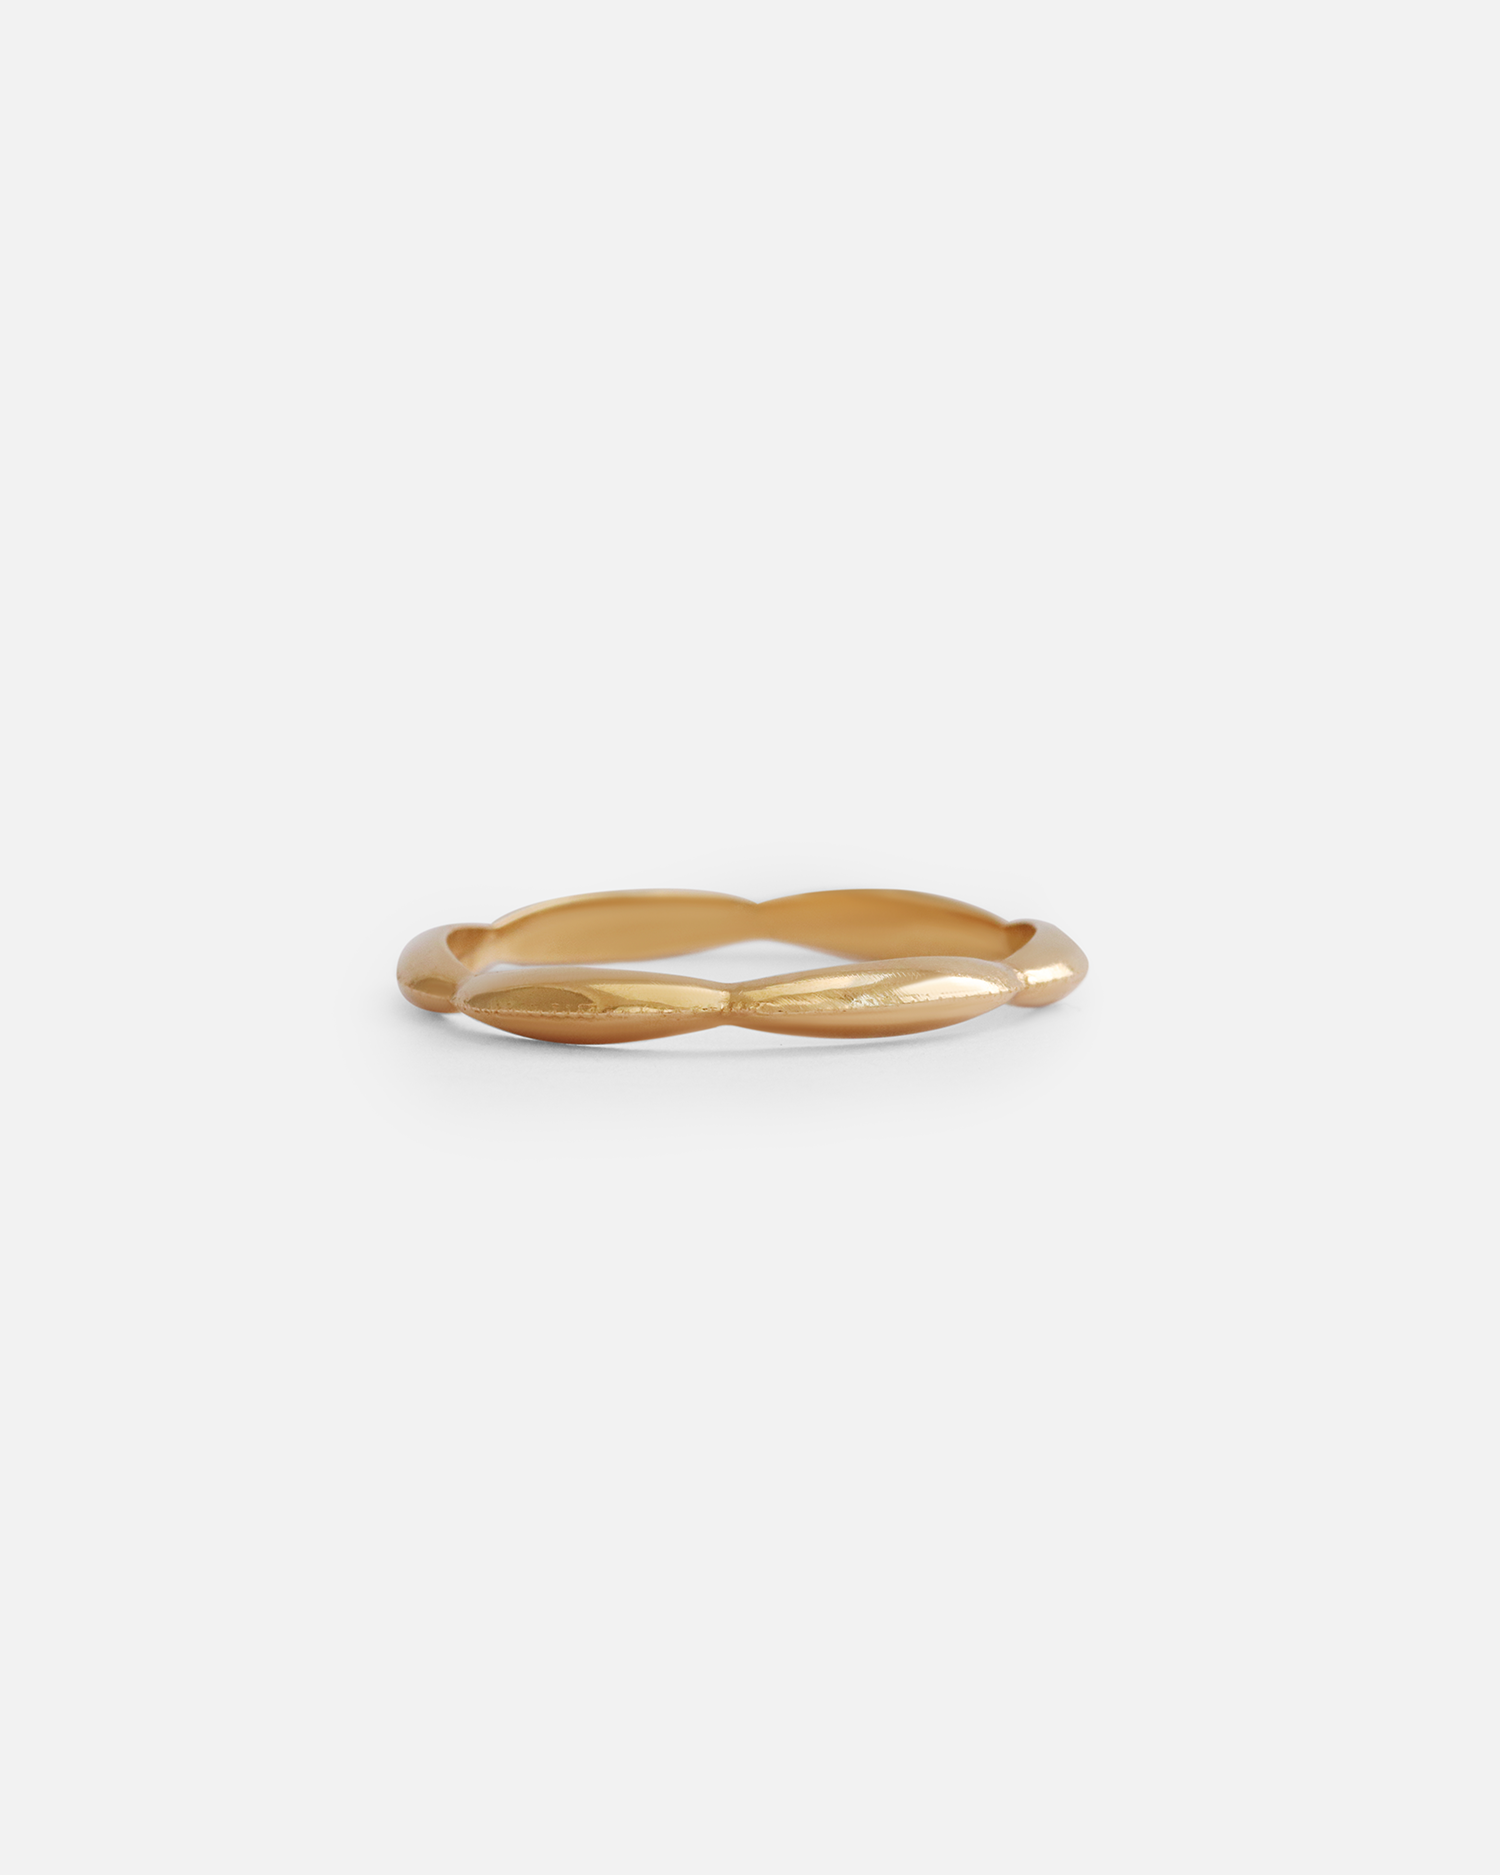 Romantic Array / Scallop Band By Ruowei